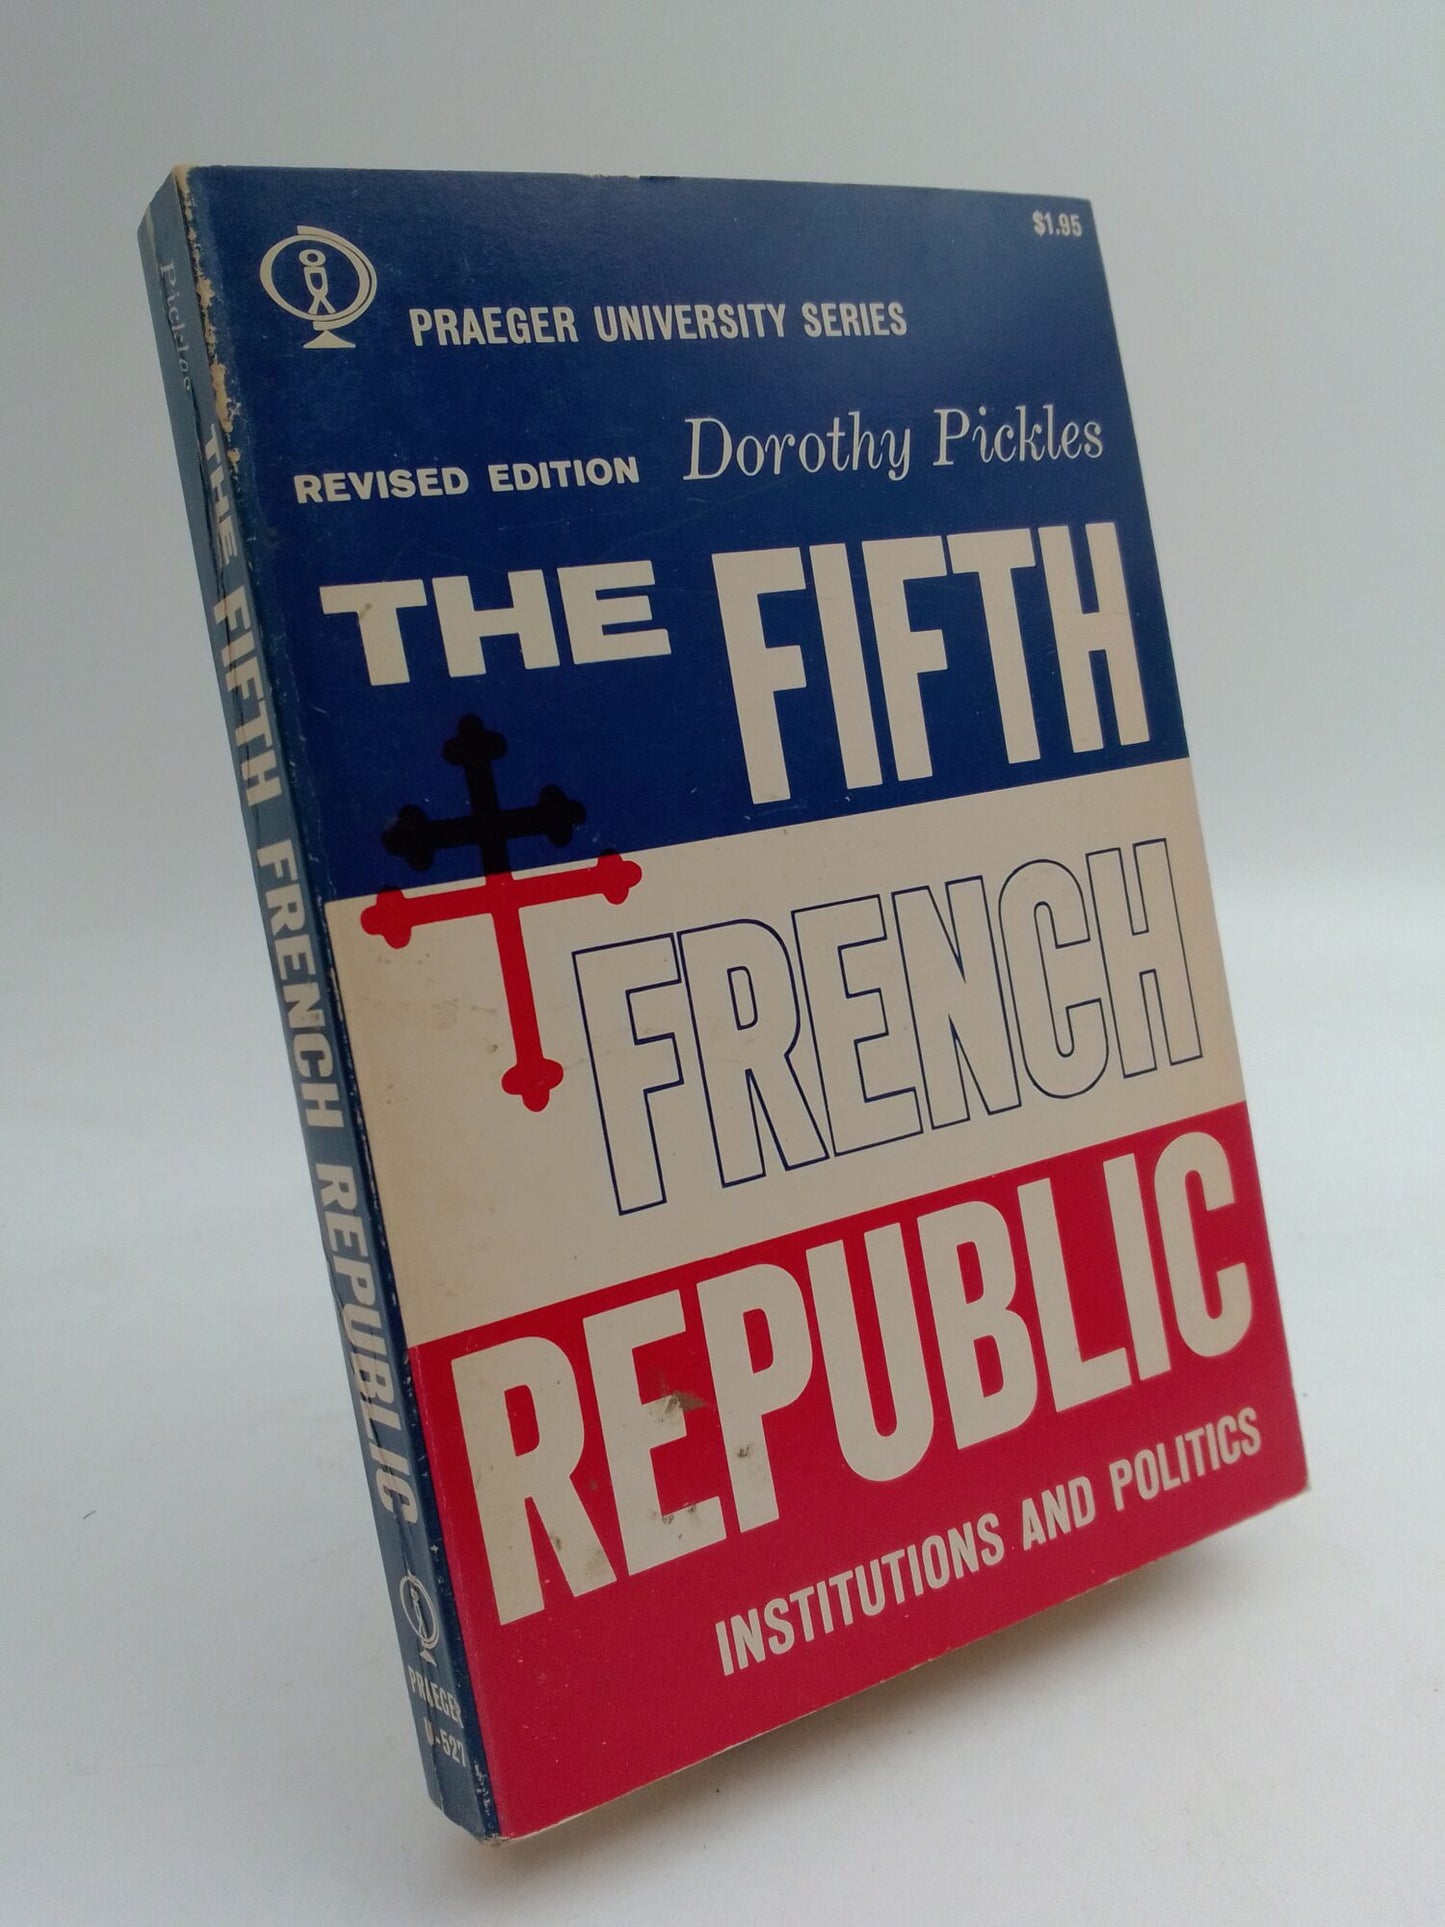 Pickles, Dorothy | The Fifth French Republic : Institutions and politics [revised edition]